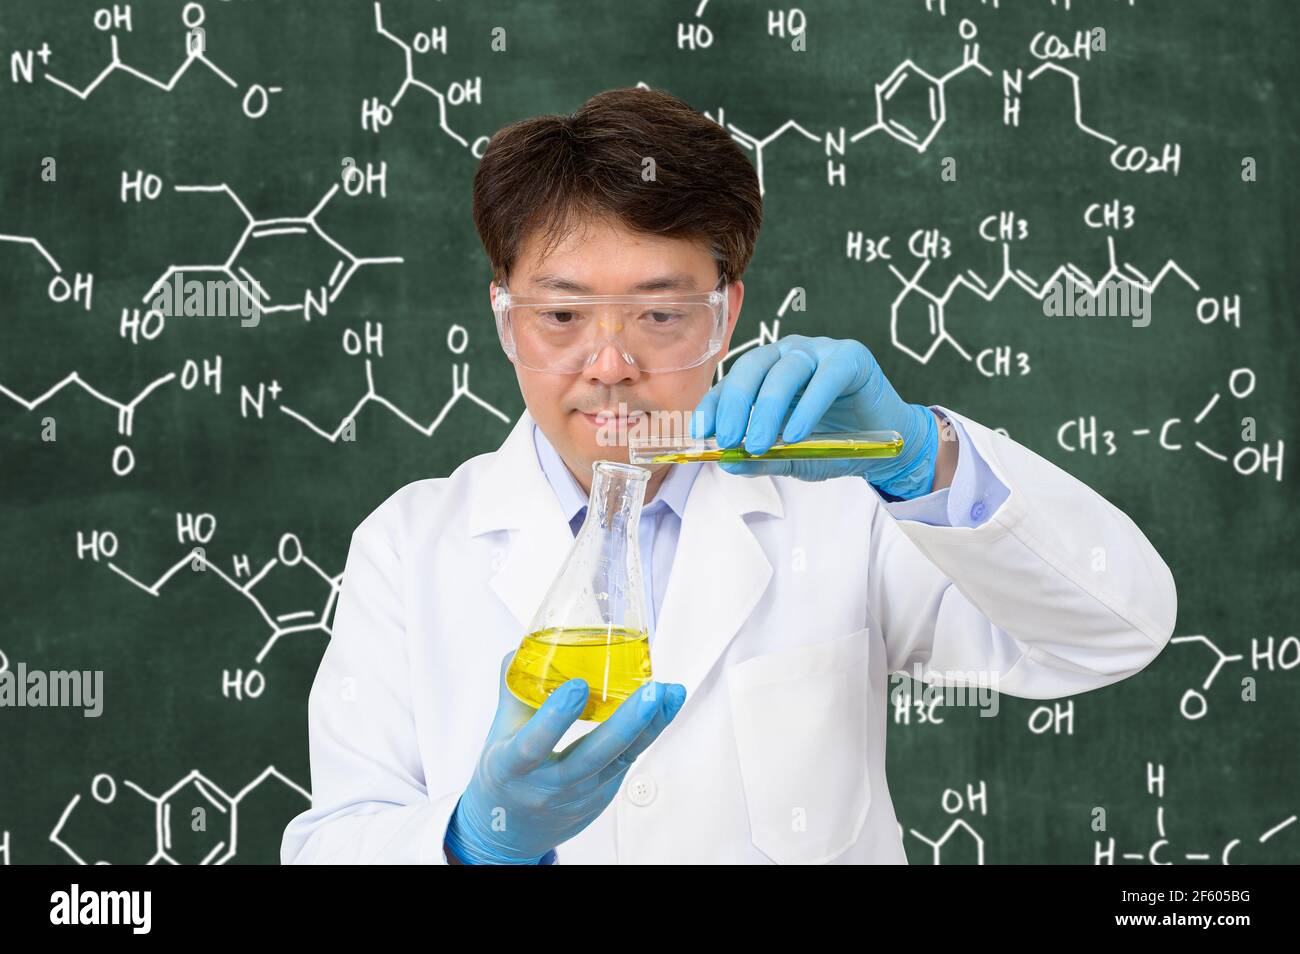 A middle-year Asian male scientist wearing gloves and holding an experimental container in front of a blackboard with a formula written on it. Stock Photo